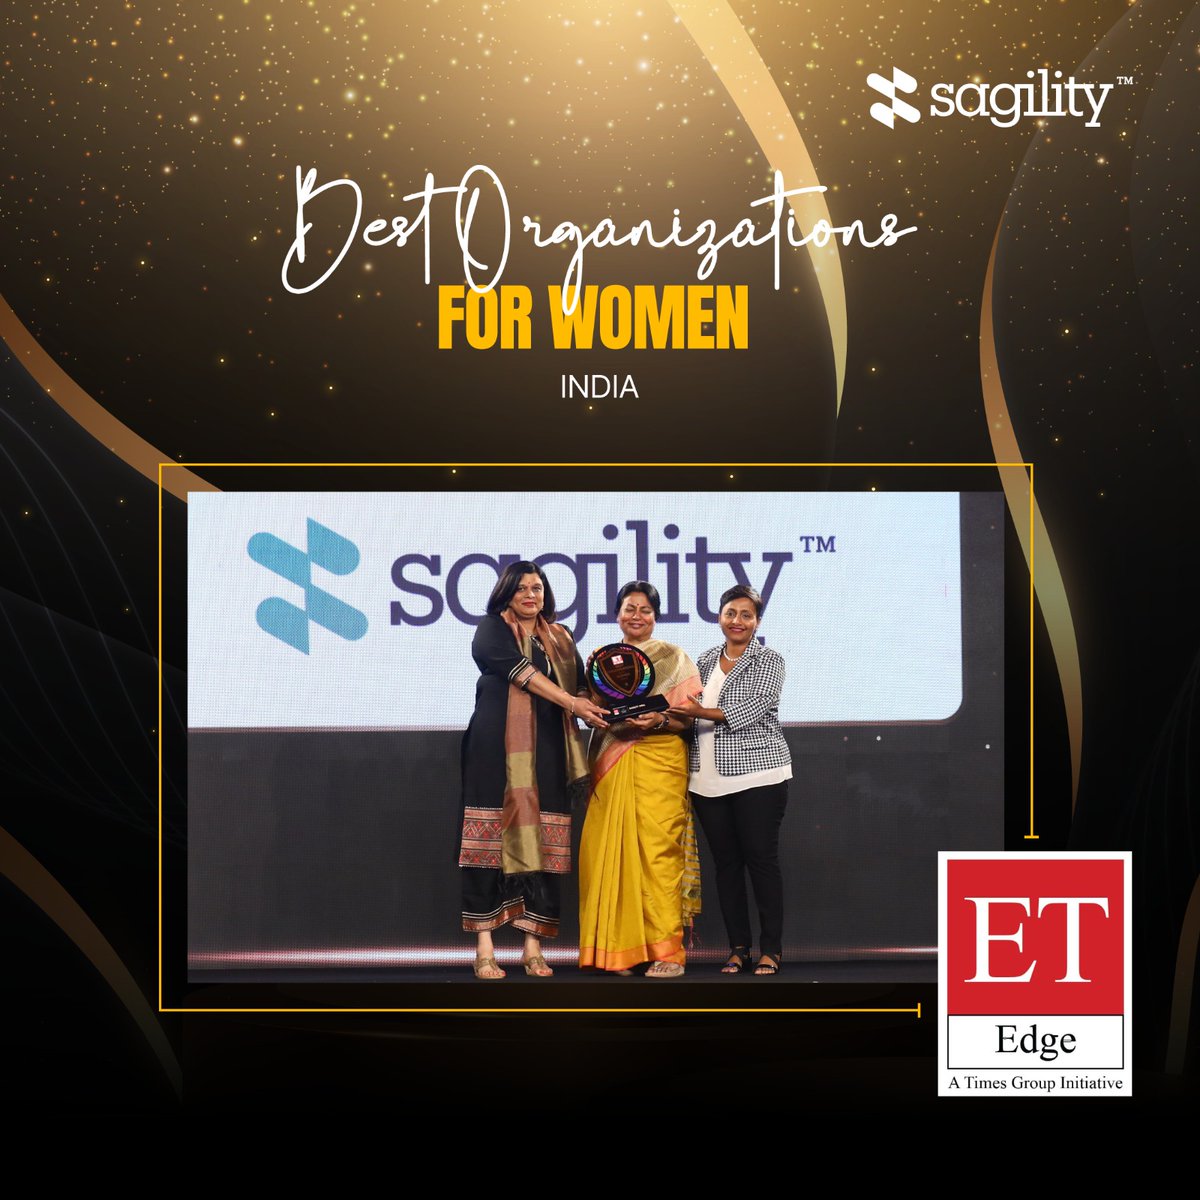 We are thrilled to announce that #Sagility has been named one of the Best Organizations for Women 2024 by ET Edge - A Times Group Initiative.
Our inclusion shows how we are all committed to making Sagility inclusive and helping everyone succeed.
#WeAreSagility #SOARWithSagility